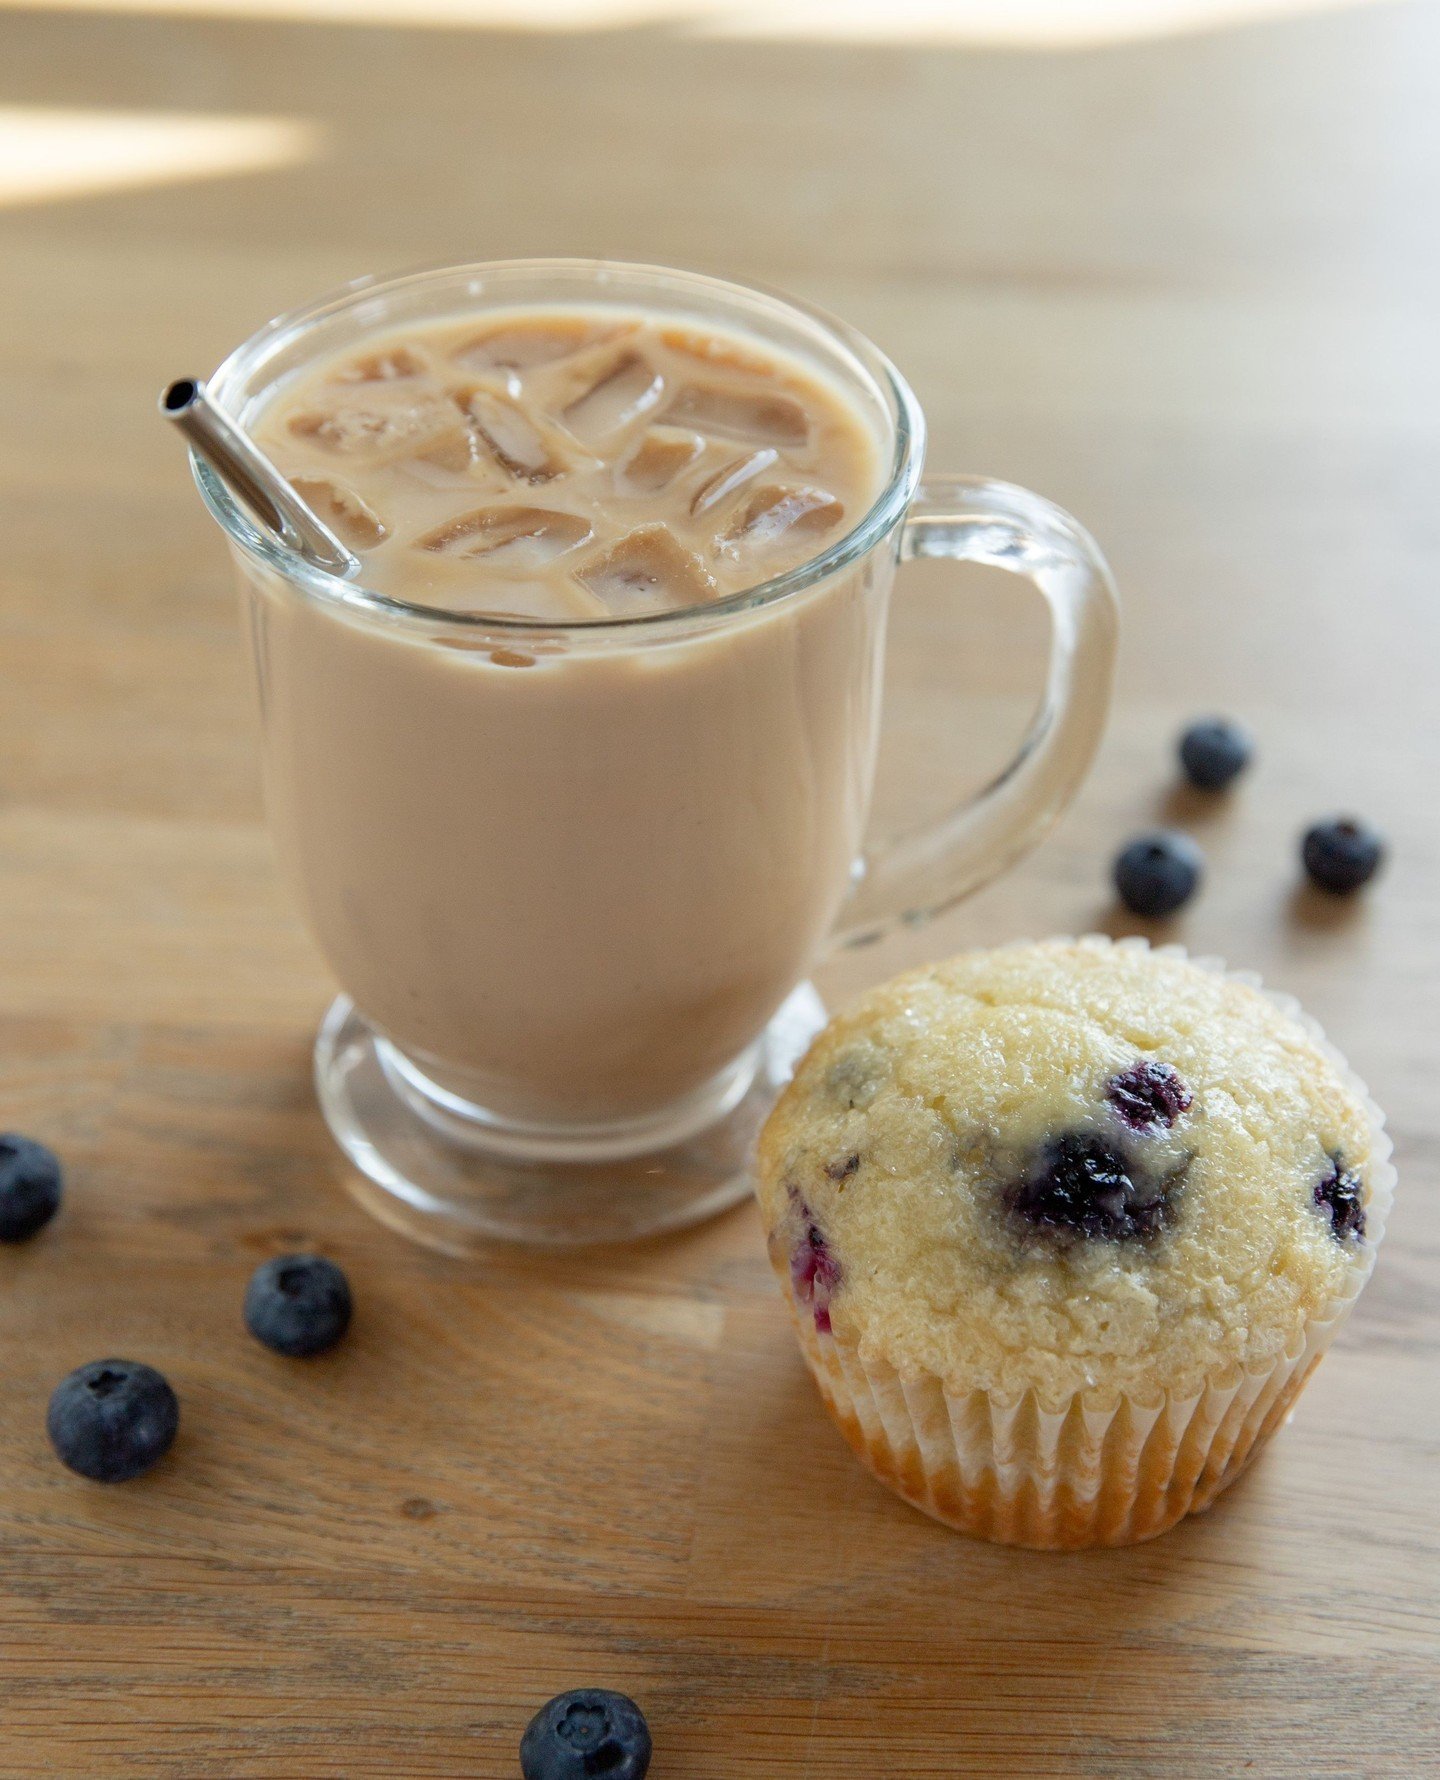 Get a mouthful of the best part of the pastry &ndash; introducing our new Top of the Muffin Iced latte! 🫐 ⁠
⁠
This coffee-based beverage is made with brown sugar cinnamon, vanilla, and a natural blueberry puree. Available while supplies last!⁠
⁠
Joi